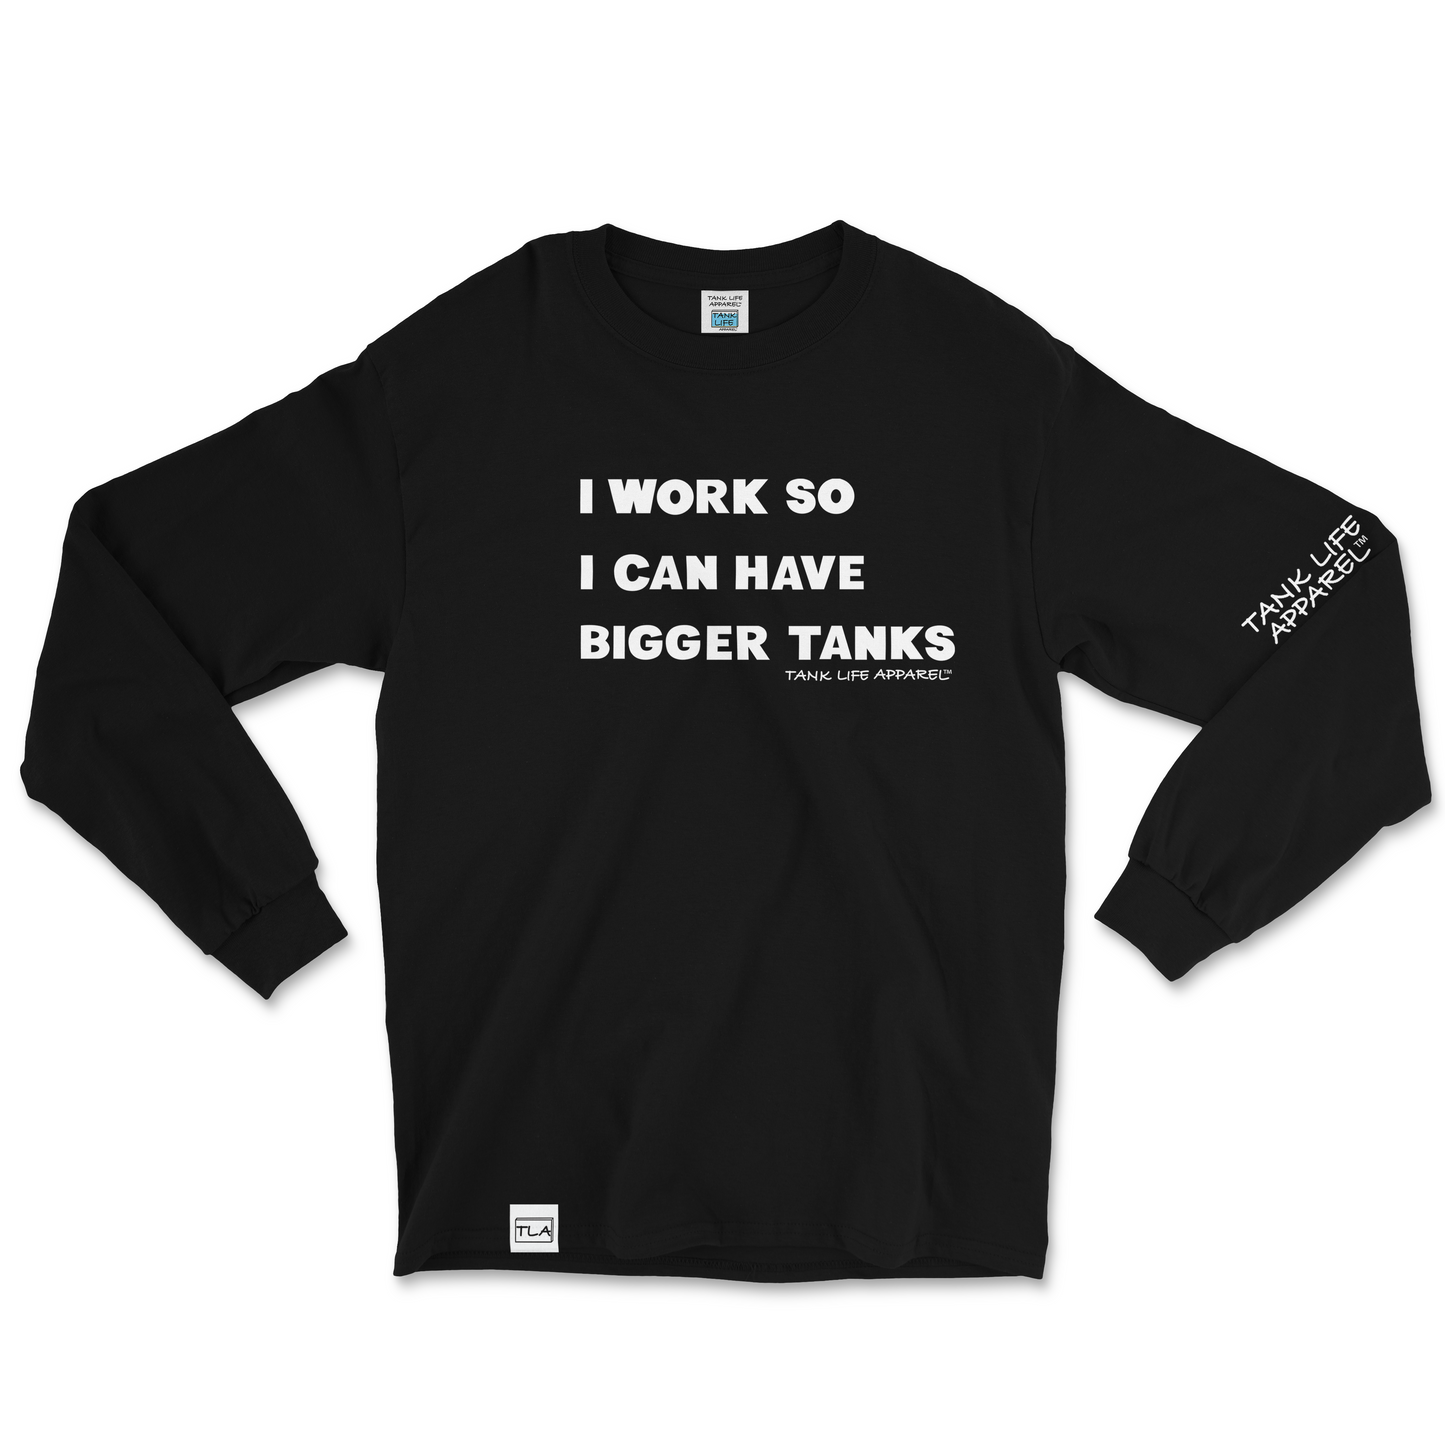  Tank Life Apparel "I work so I can have bigger tanks" design on a super comfortable long sleeve shirt. Our sleeve logo along with our custom TLA hem label give this shirt an elevated look.